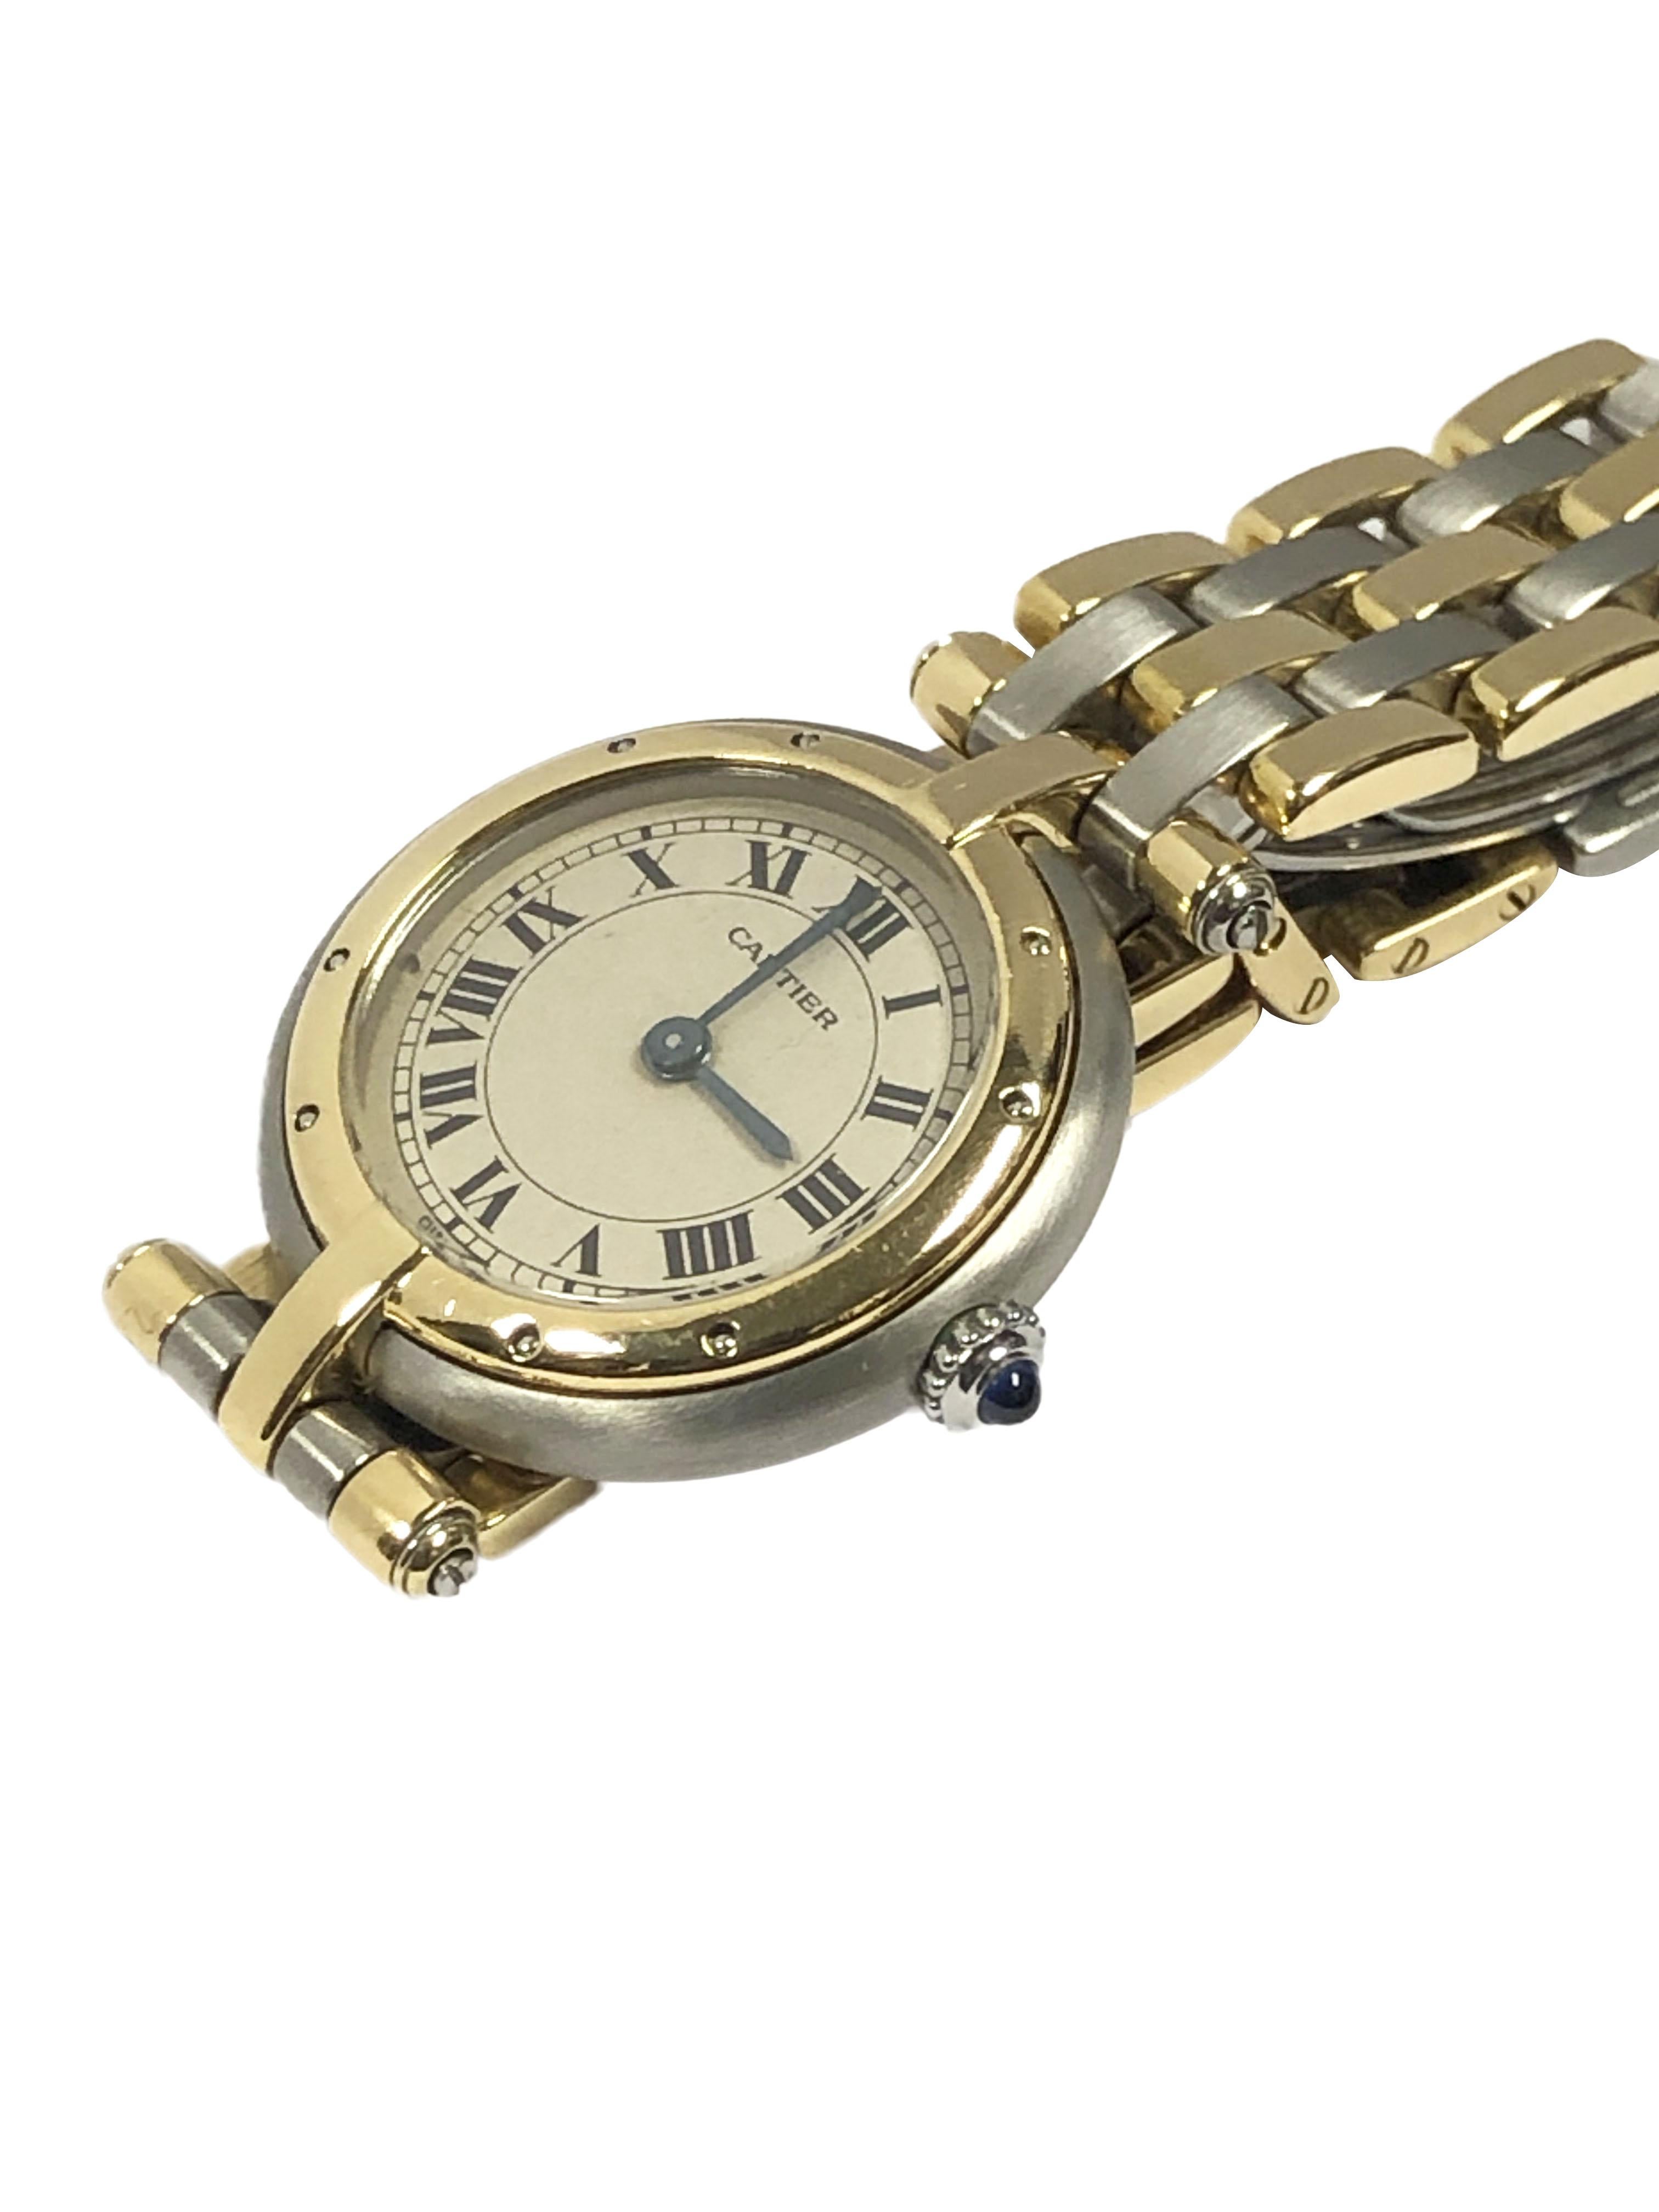 Circa 1990s Cartier Panther Ronde Collection Ladies Wrist watch, 24 MM Stainless Steel Case with 18K yellow Gold Bezel, Quartz Movement, Silver Satin Dial with Black Roman Numerals and a Sapphire Crown. 1/2 inch wide 18K and Stainless Steel 3 Stripe